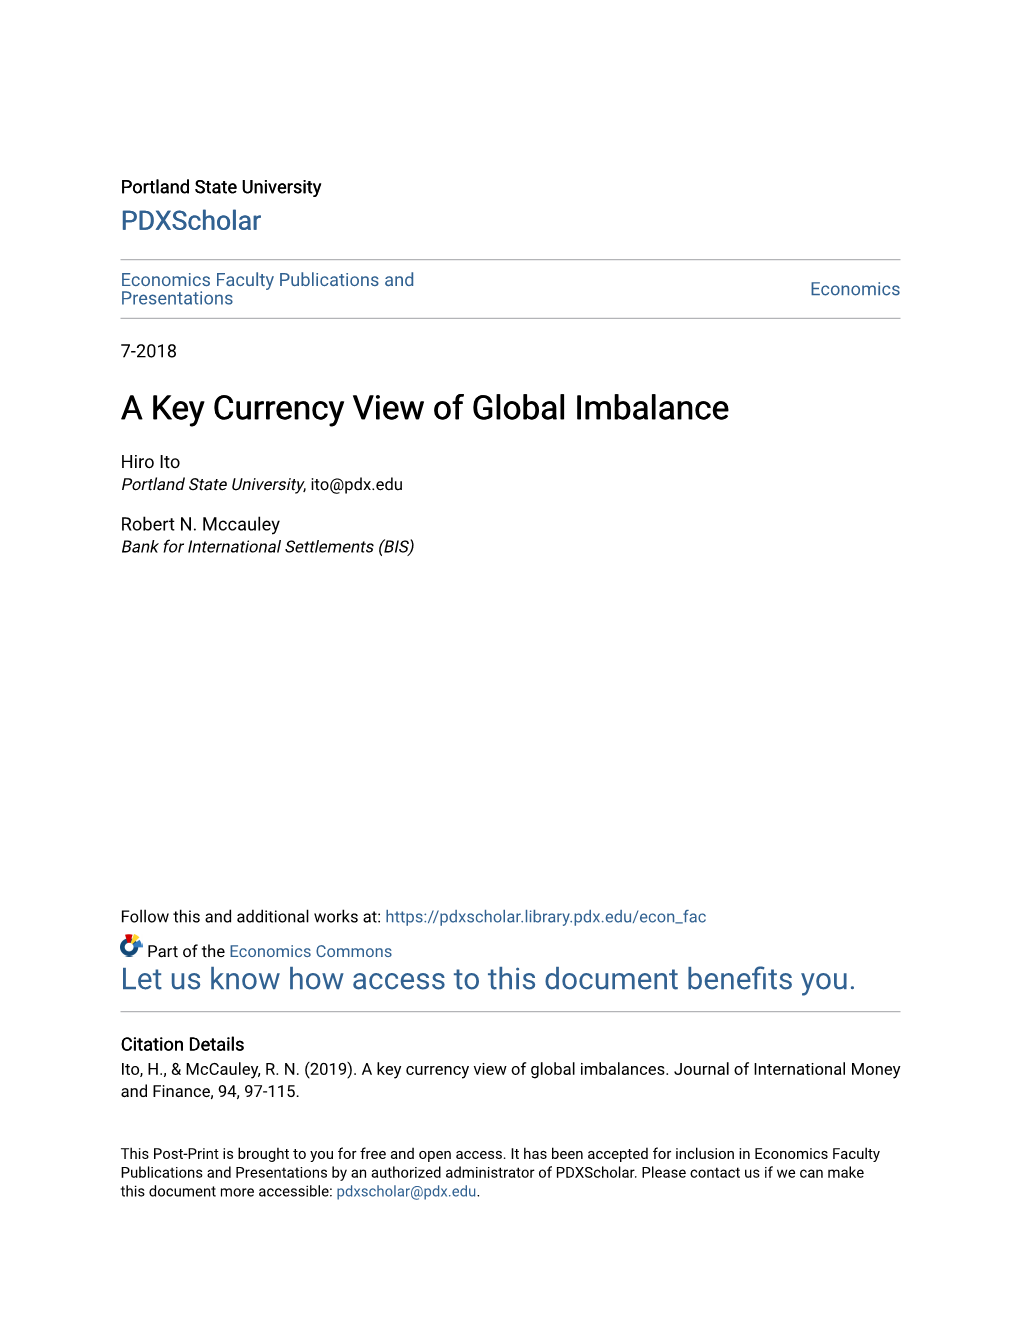 A Key Currency View of Global Imbalance